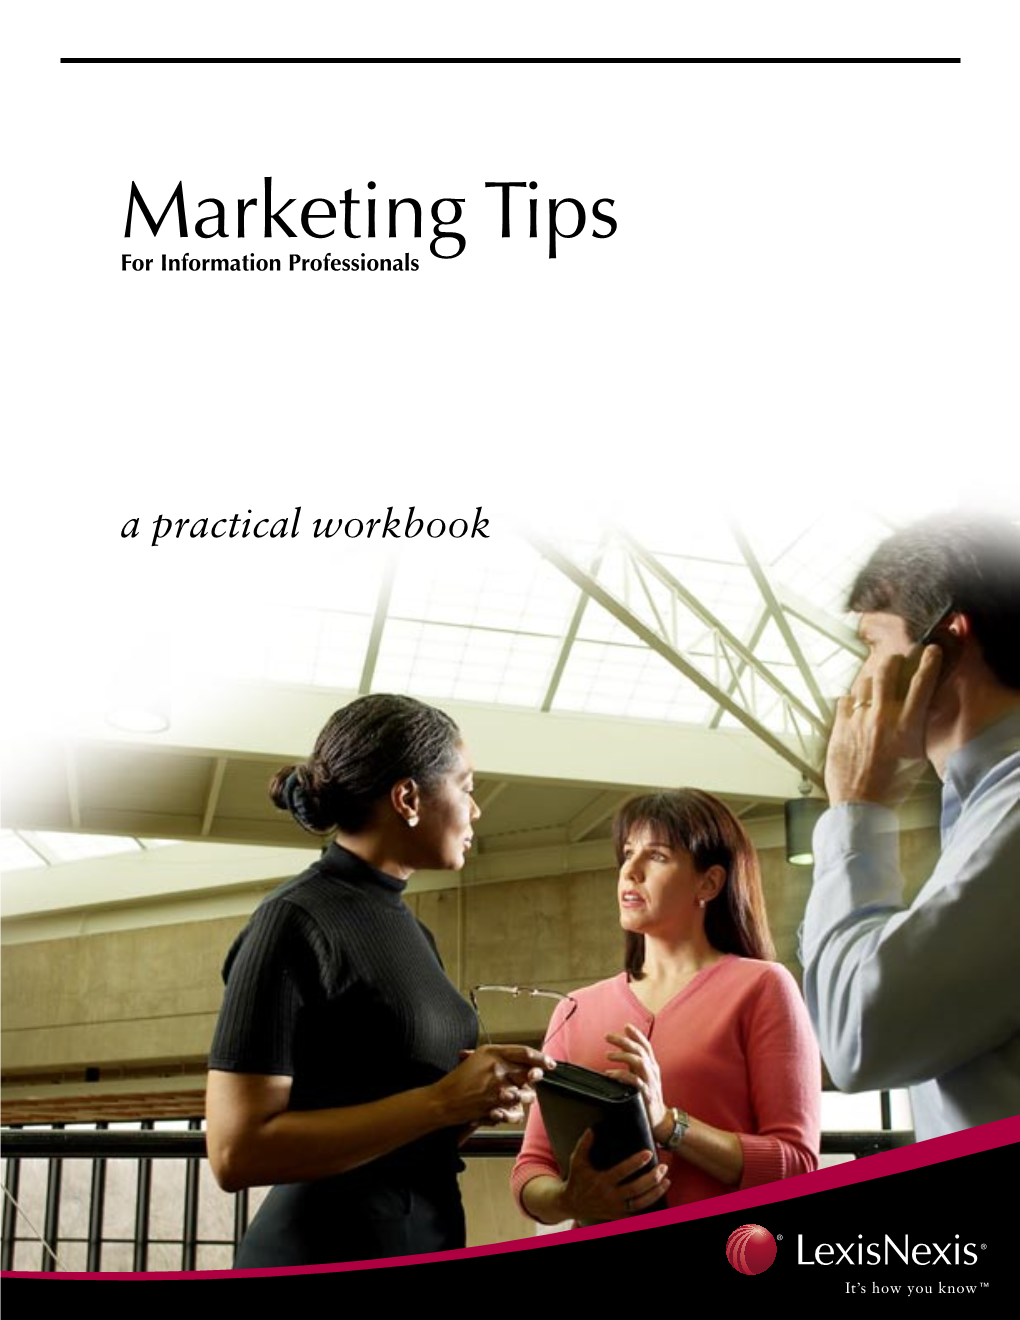 Marketing Tips for Information Professionals